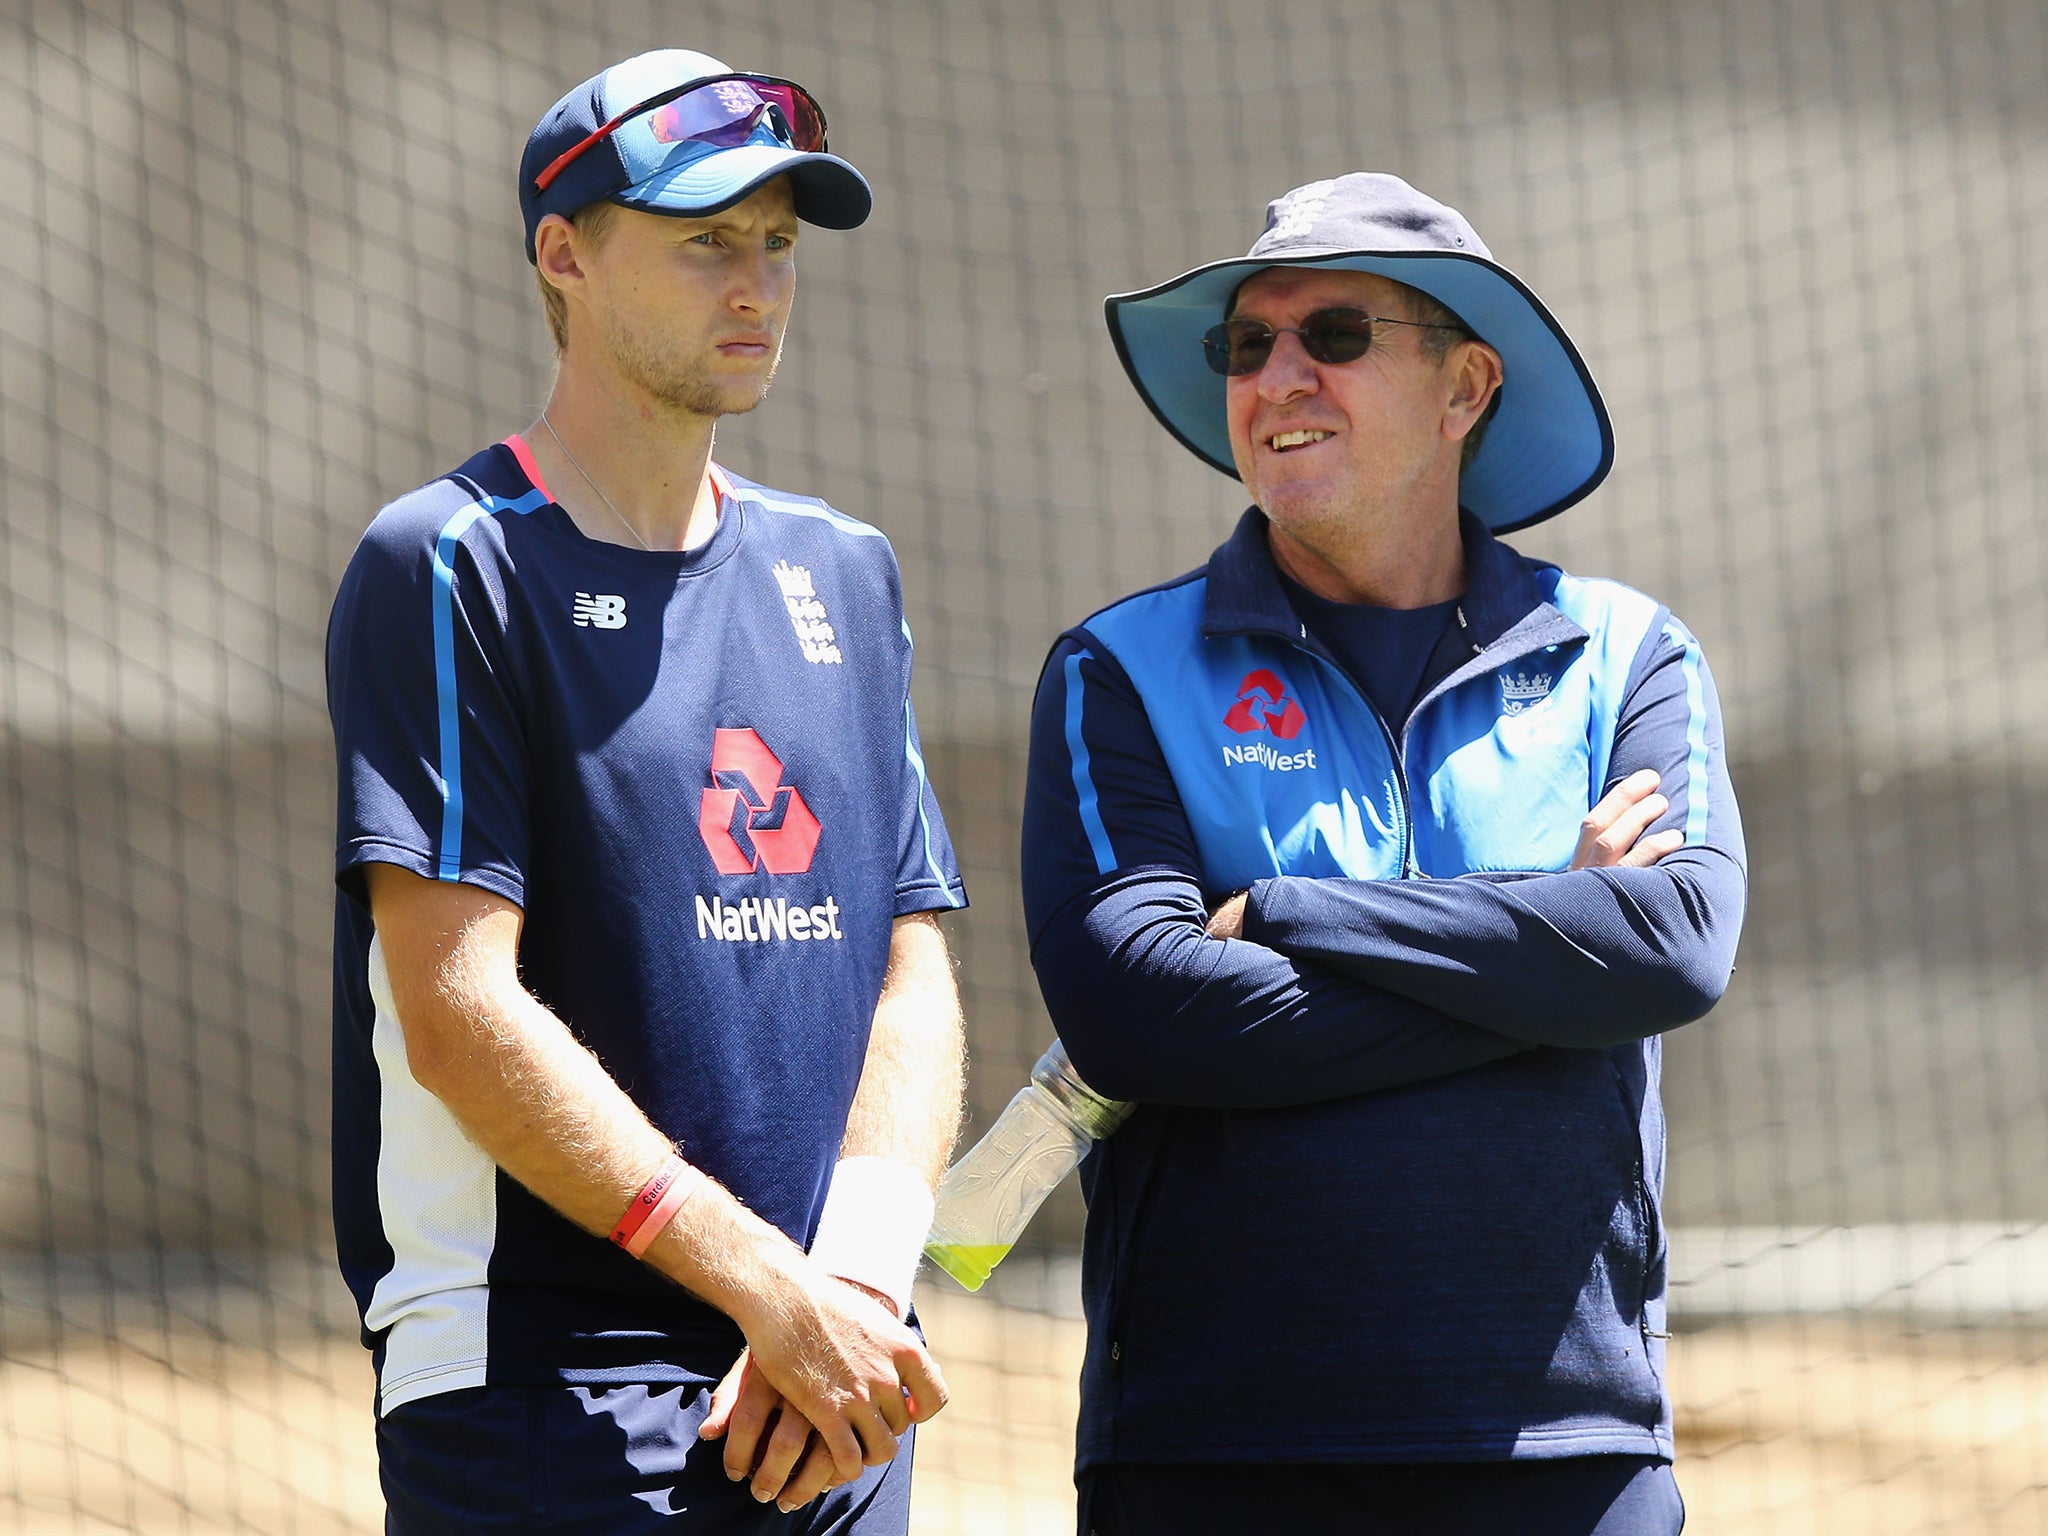 Root and Bayliss have come under criticism after losing the Ashes tour by the fourth Test